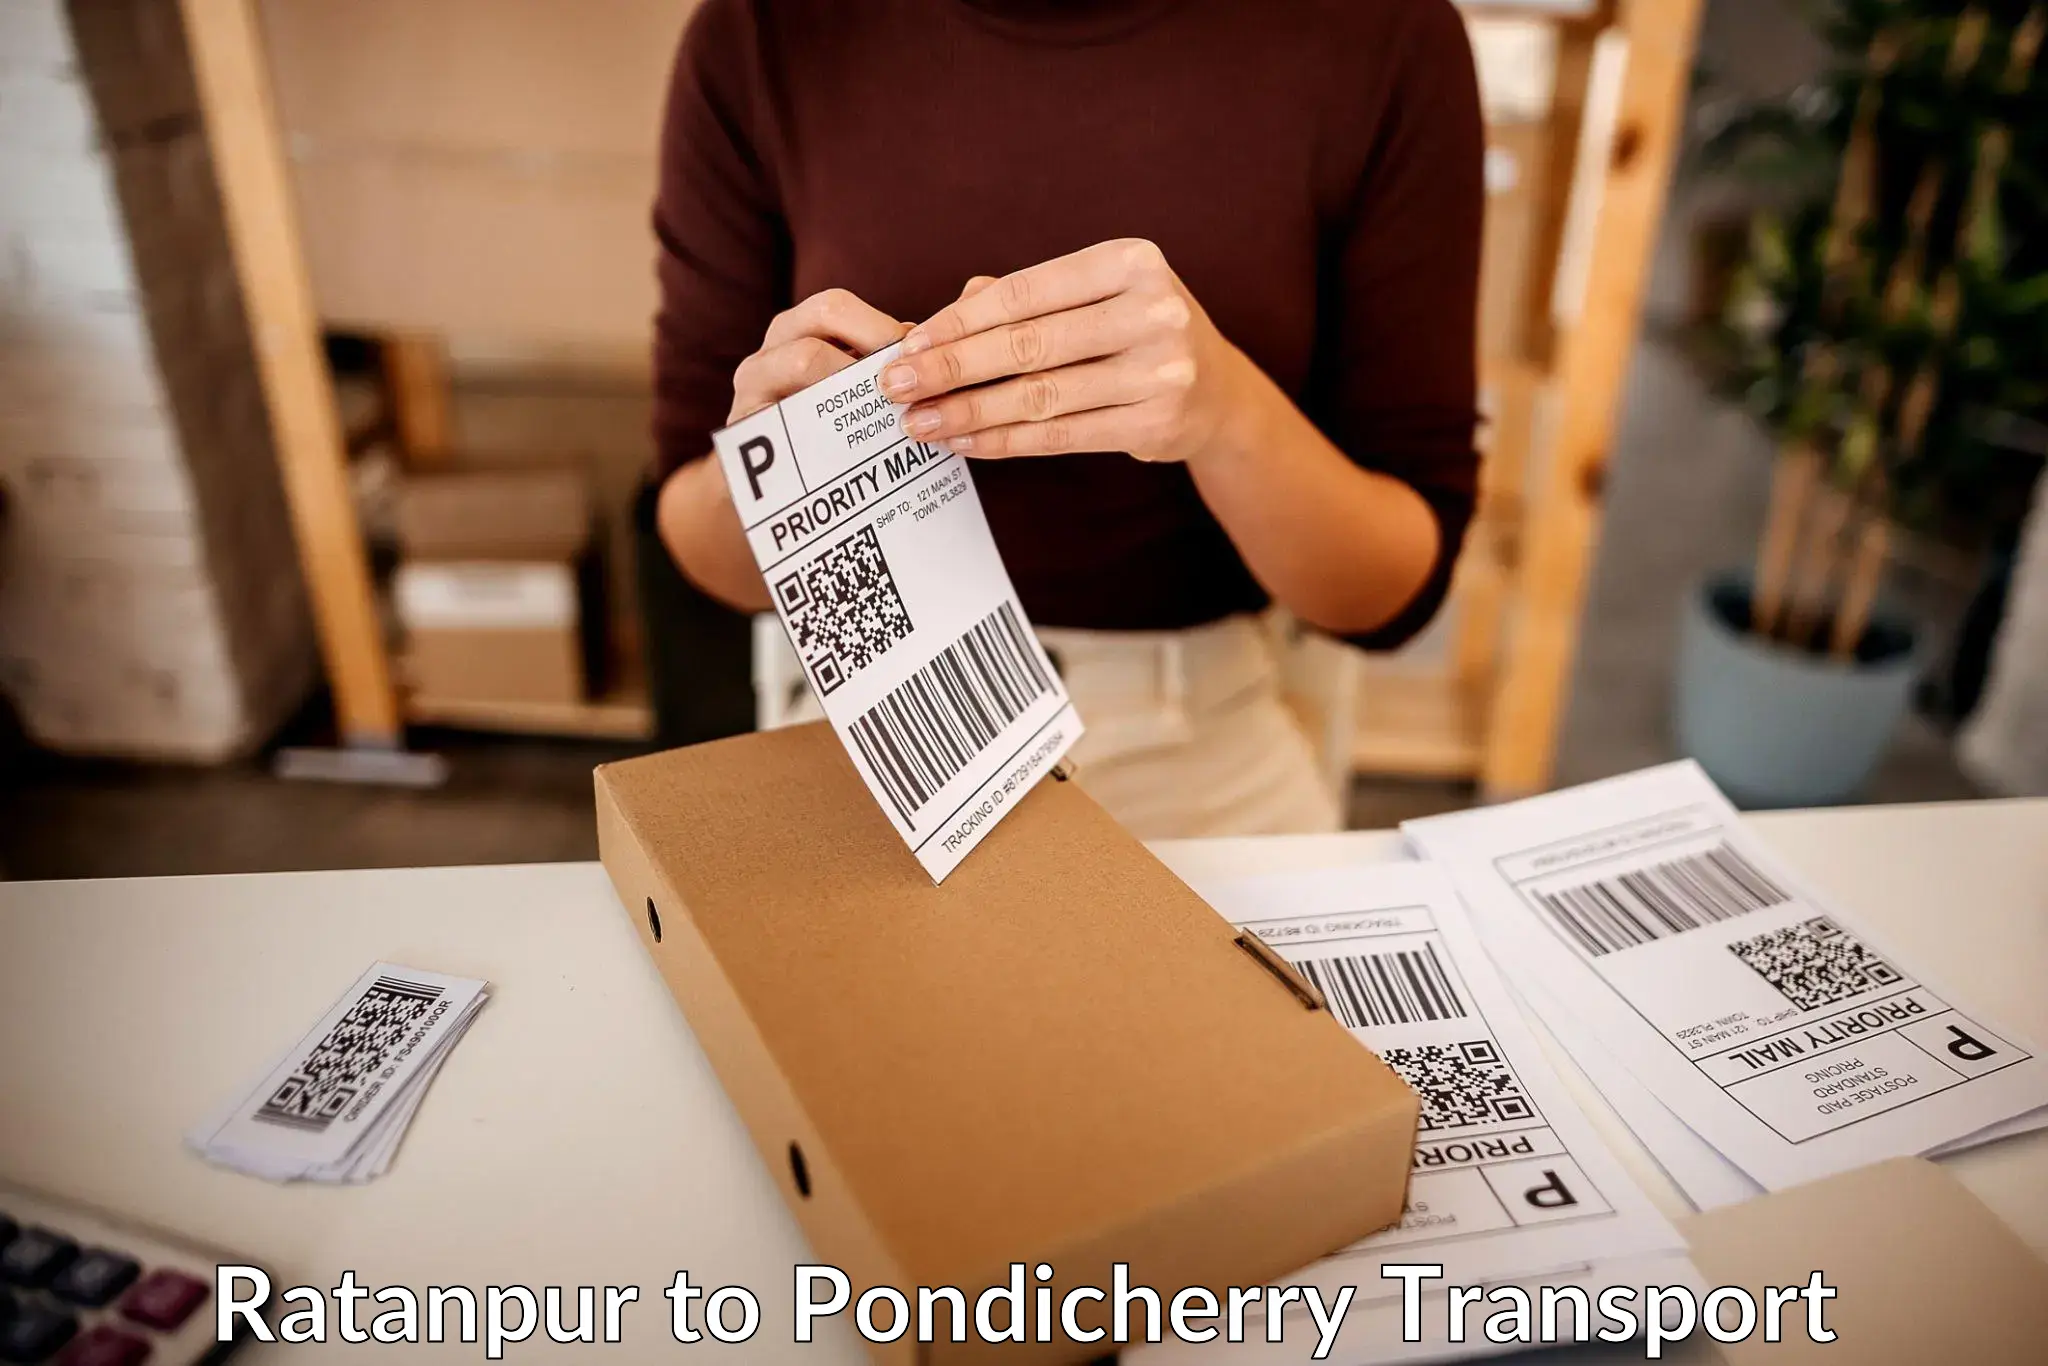 Part load transport service in India Ratanpur to Pondicherry